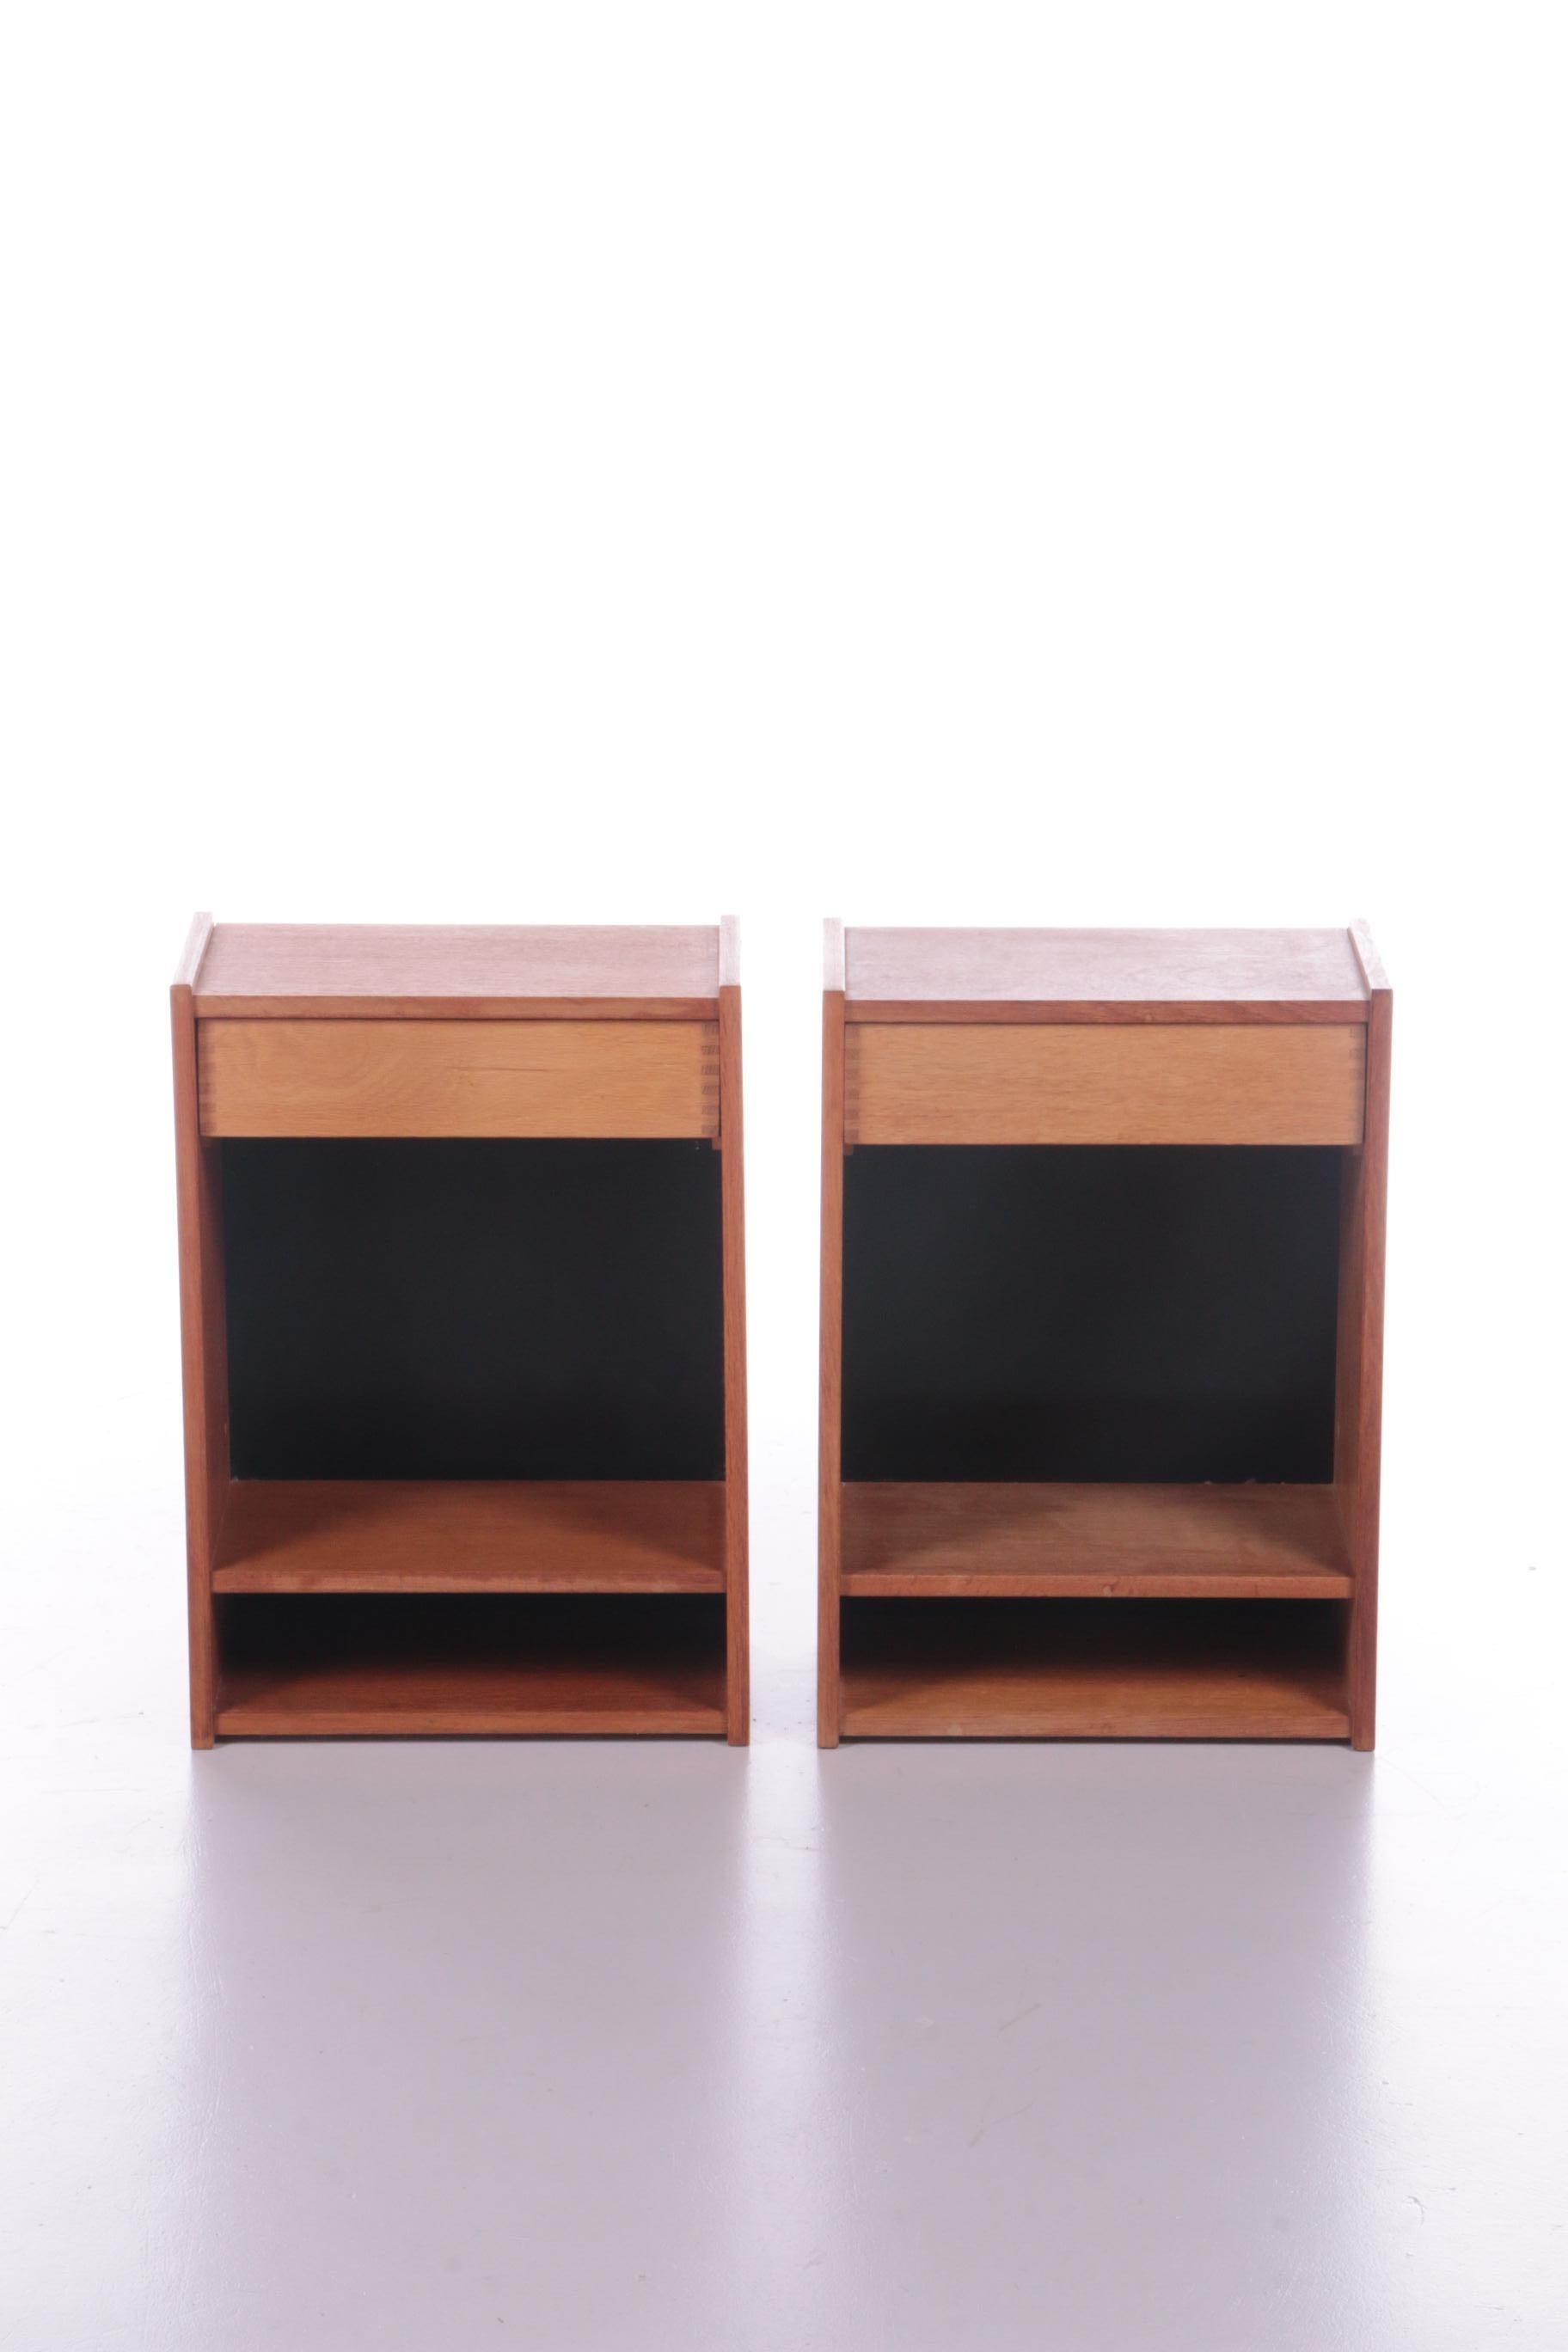 Vintage oak Danish bedside tables, 60s

This set of two mid-century bedside tables come from Denmark and were produced in the 1960s.

The bedside tables are made of sturdy and light oak wood. Each bedside table has a drawer and an extra shelf so